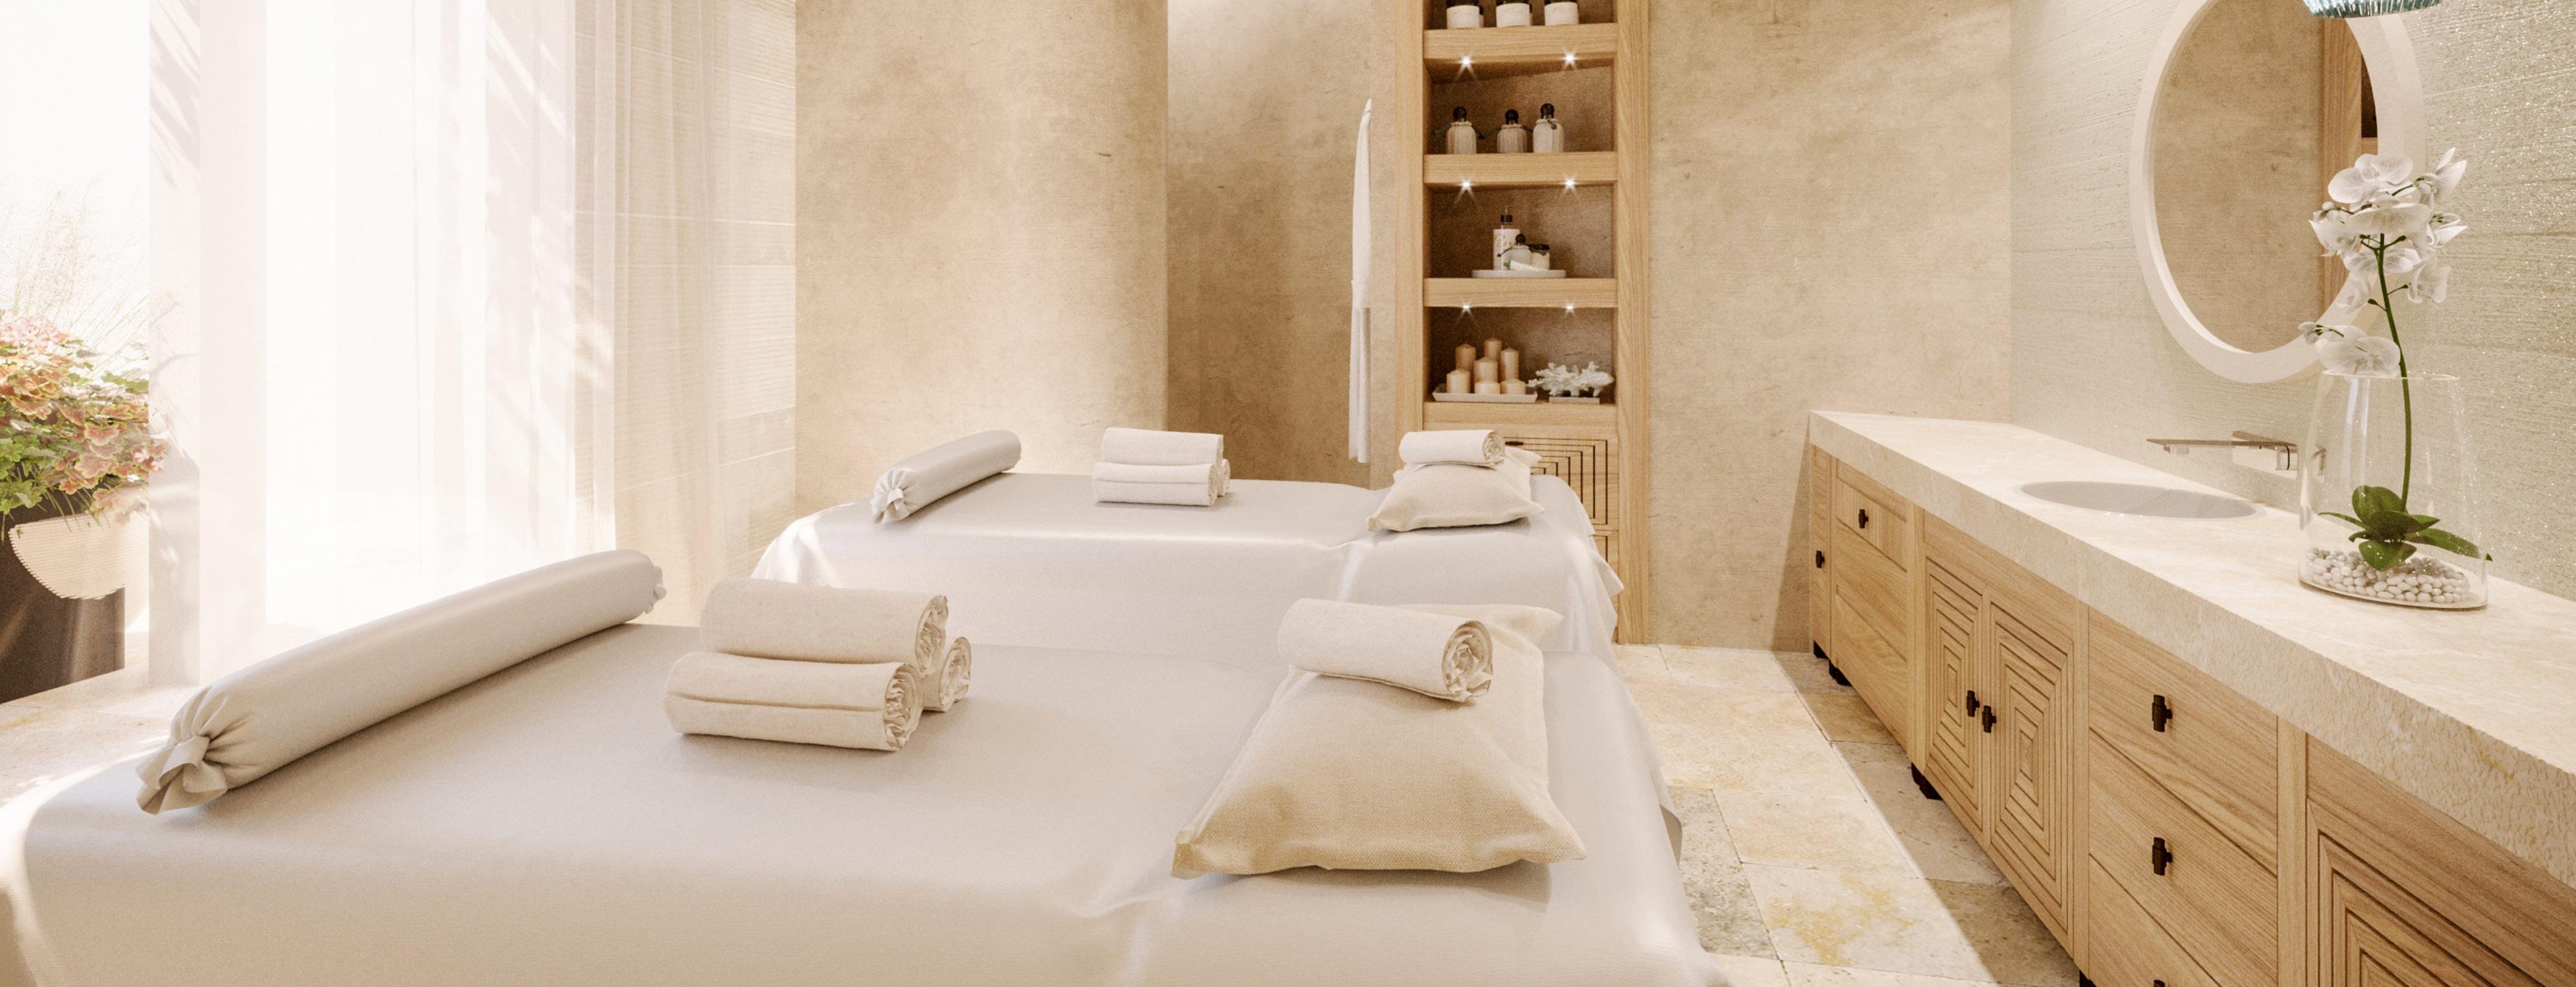 Neutral tones and natural materials in a treatment room at Pure 7 Spa
